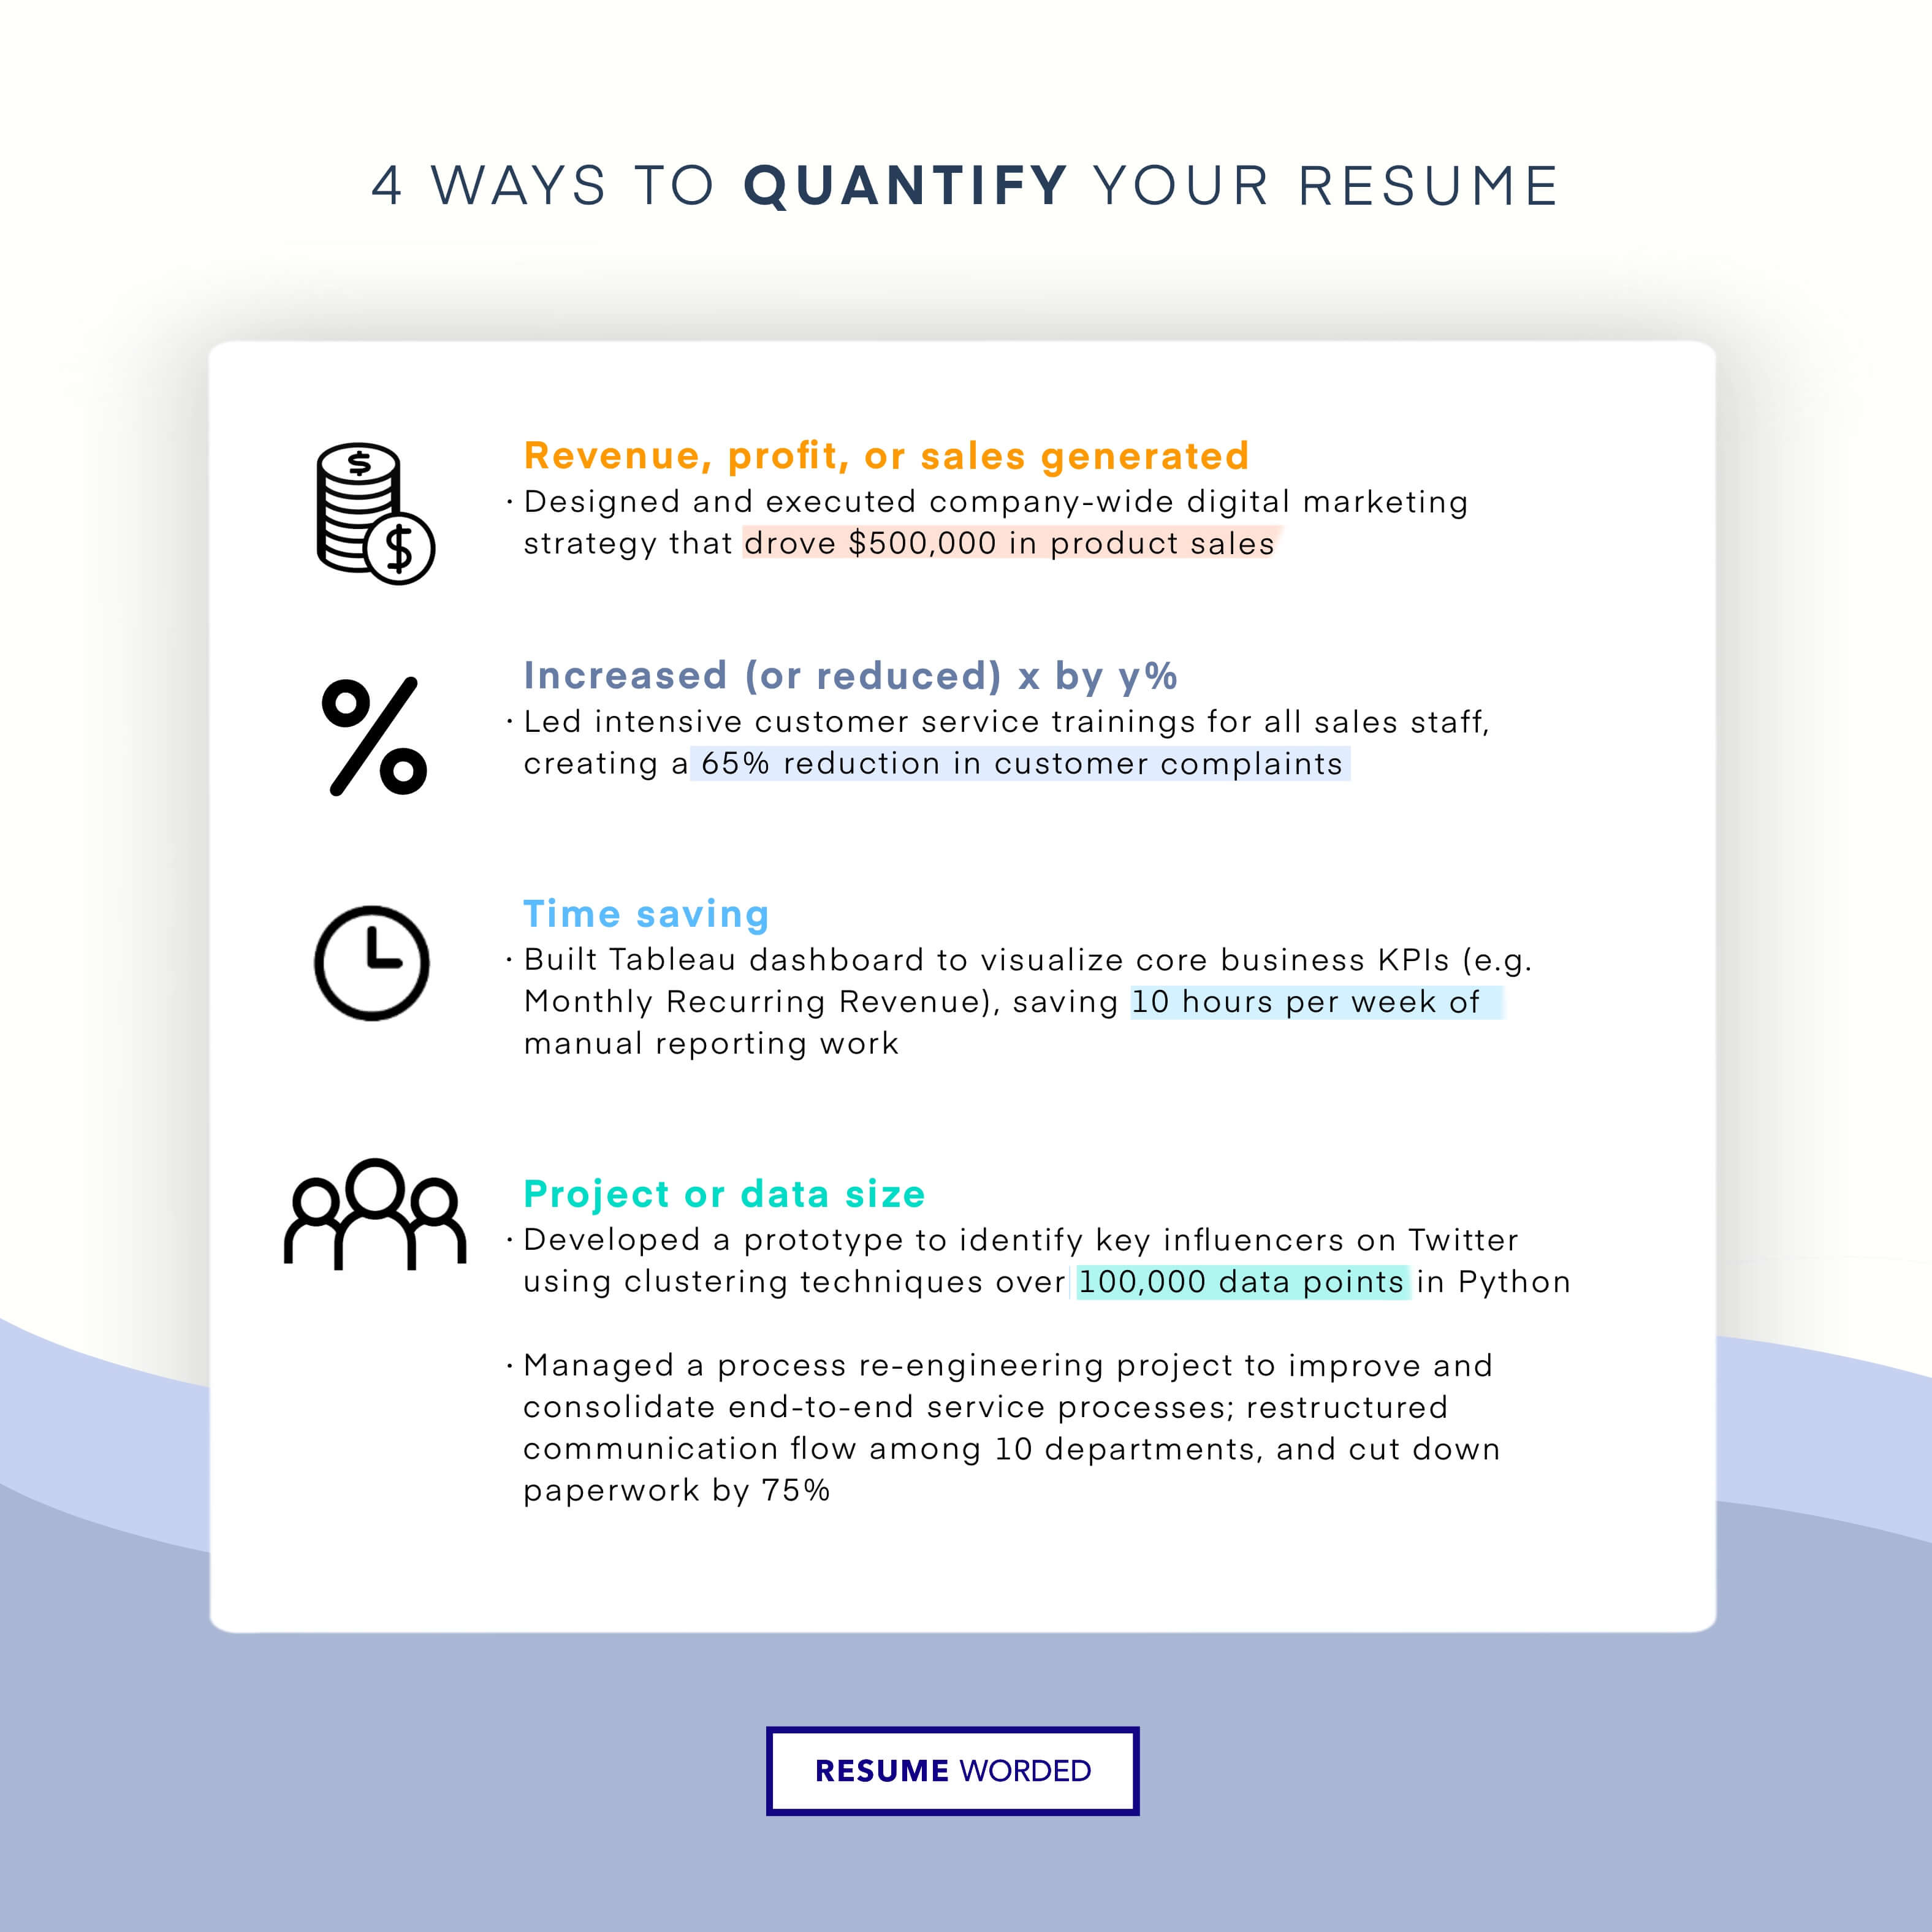 Quantify your achievements in patient care quality - Clinical Manager Resume